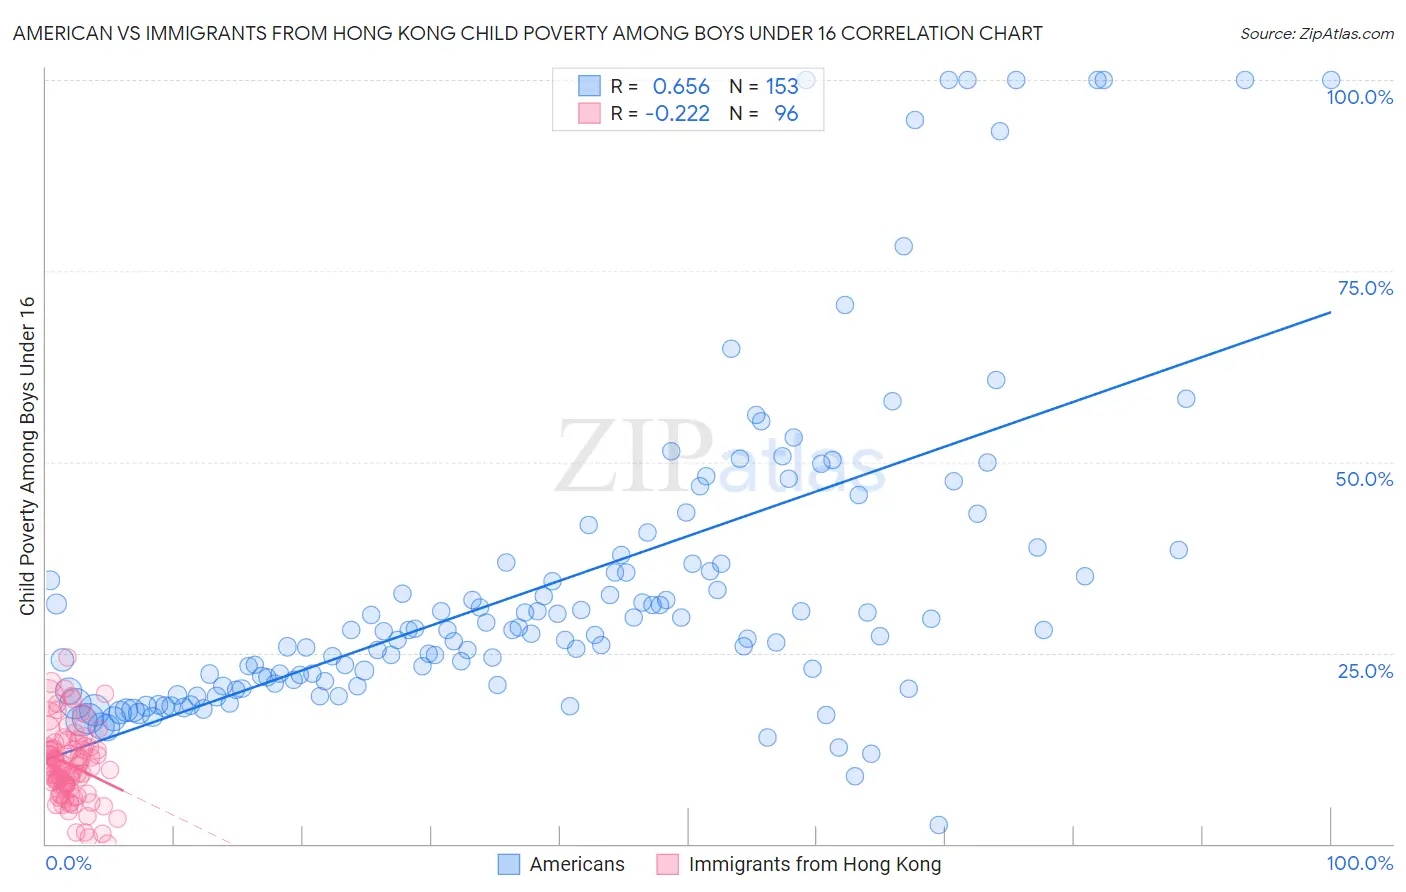 American vs Immigrants from Hong Kong Child Poverty Among Boys Under 16